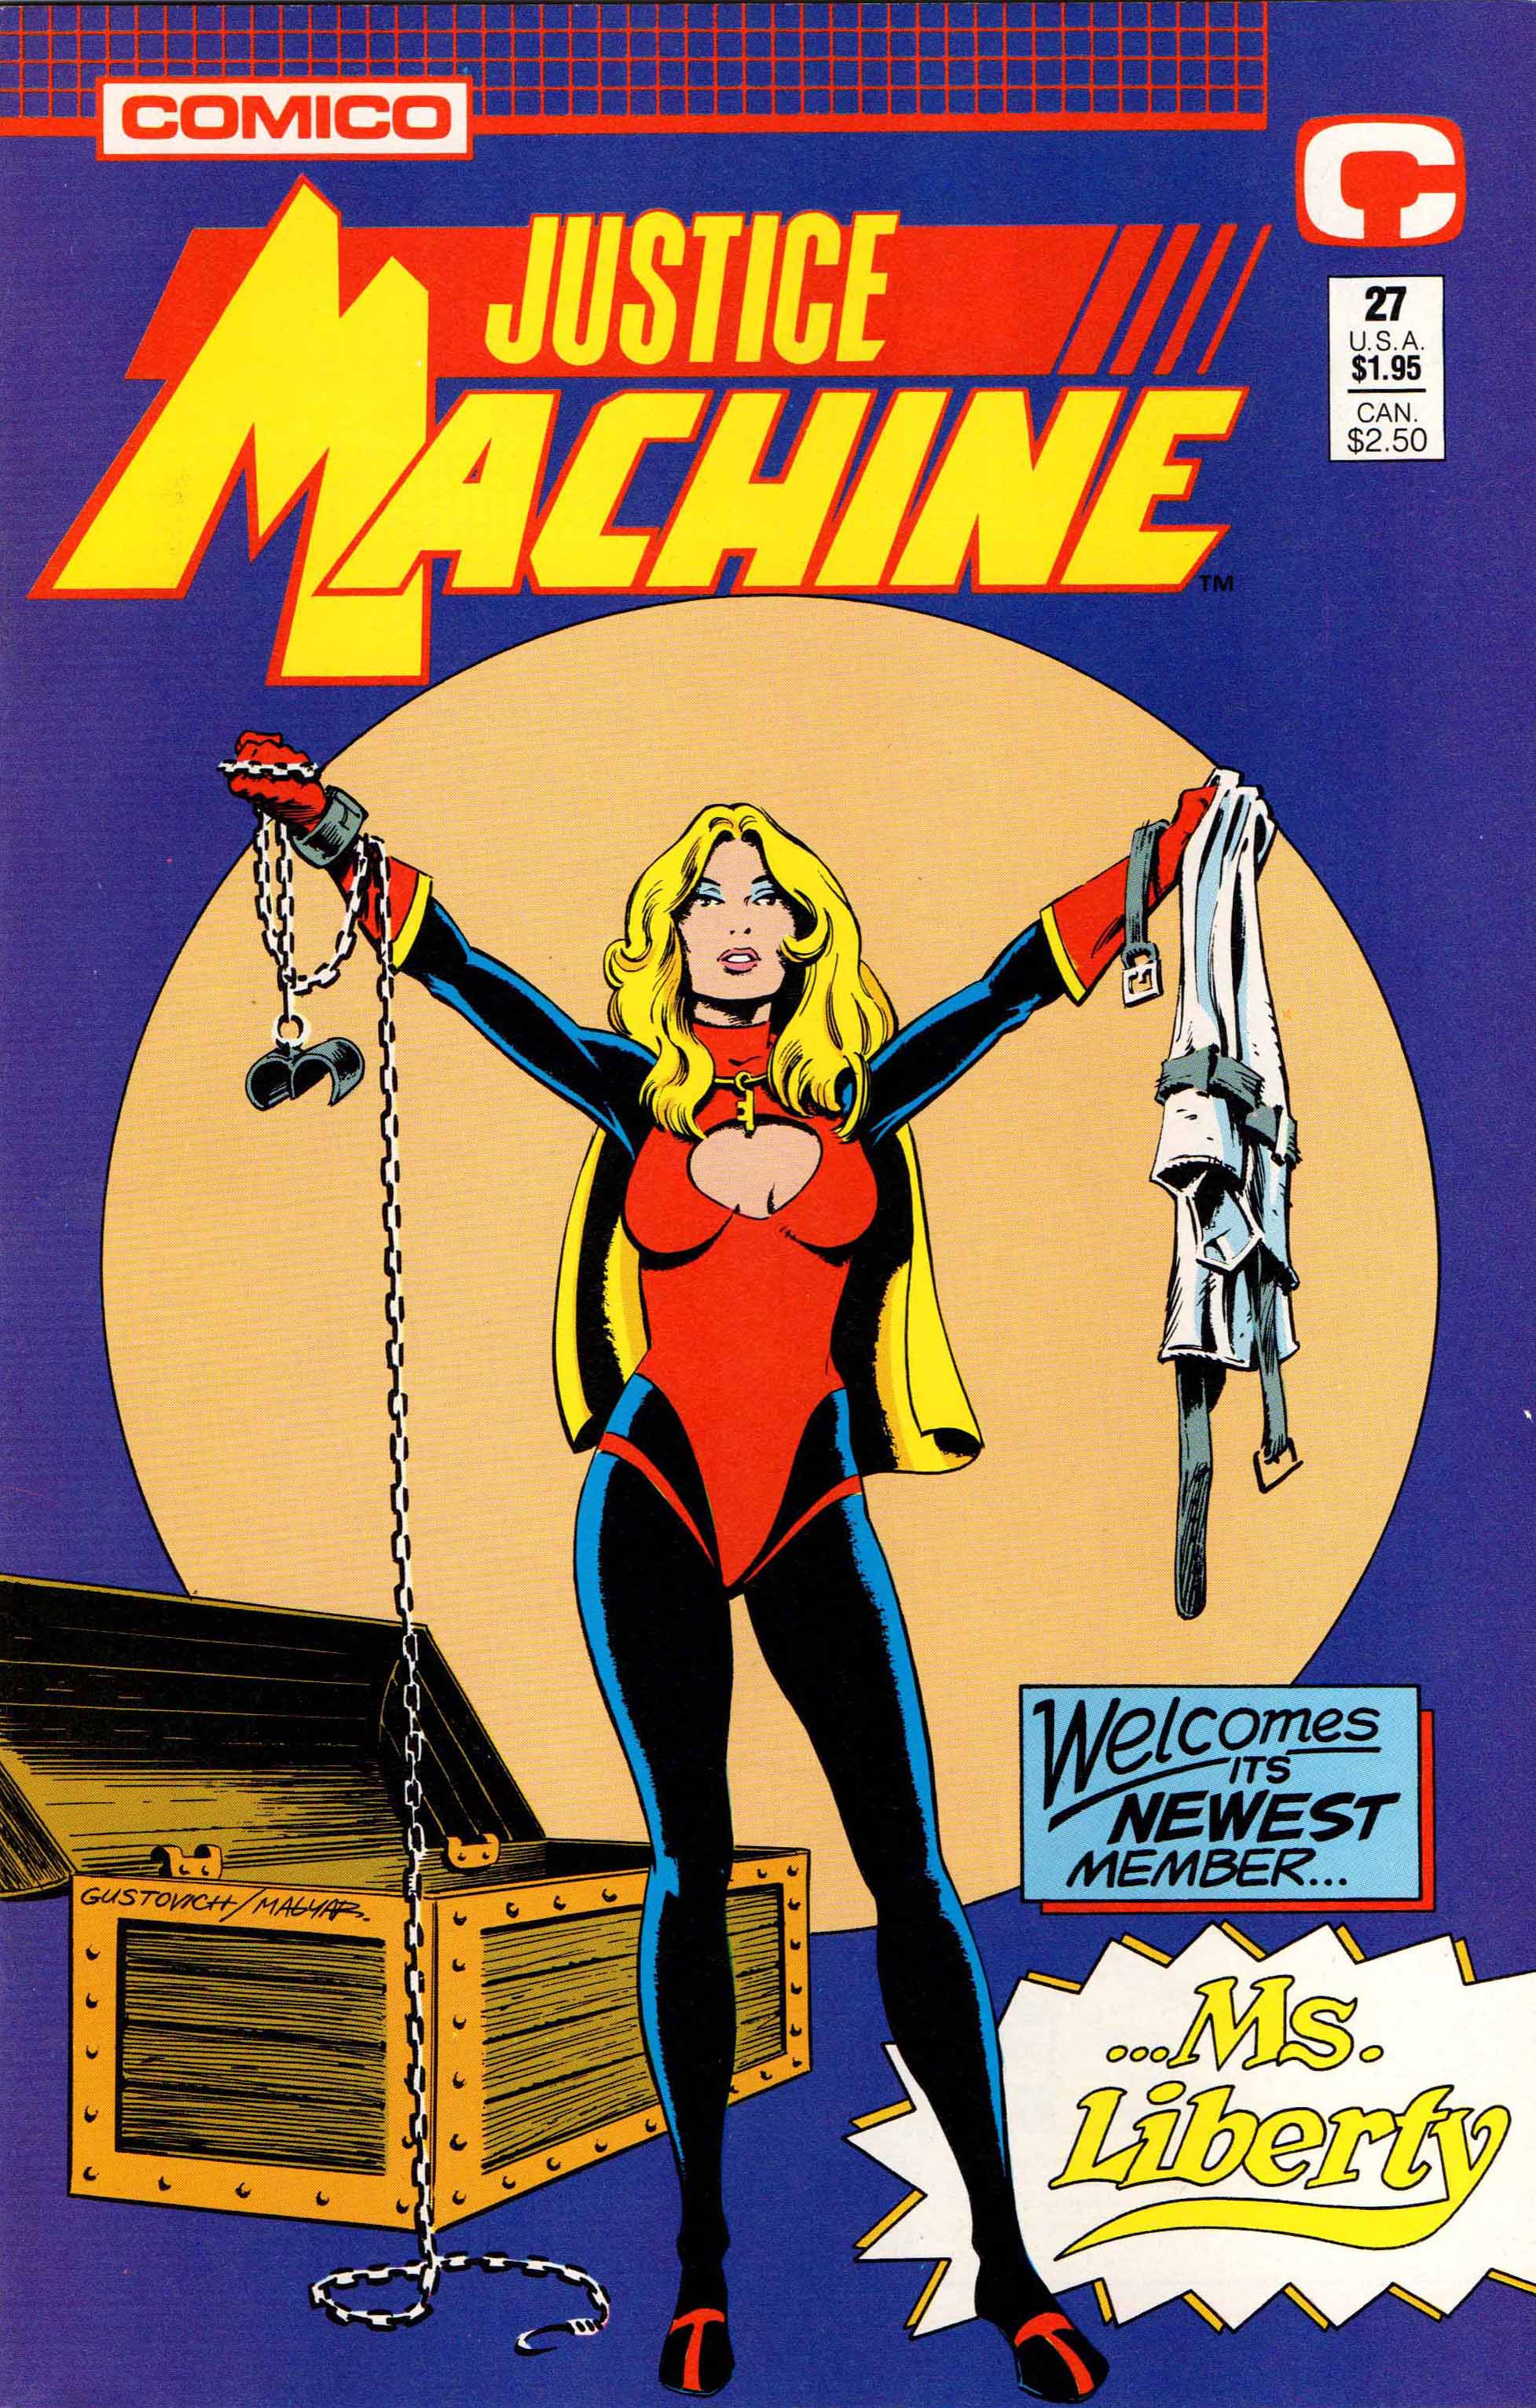 Read online Justice Machine comic -  Issue #27 - 1